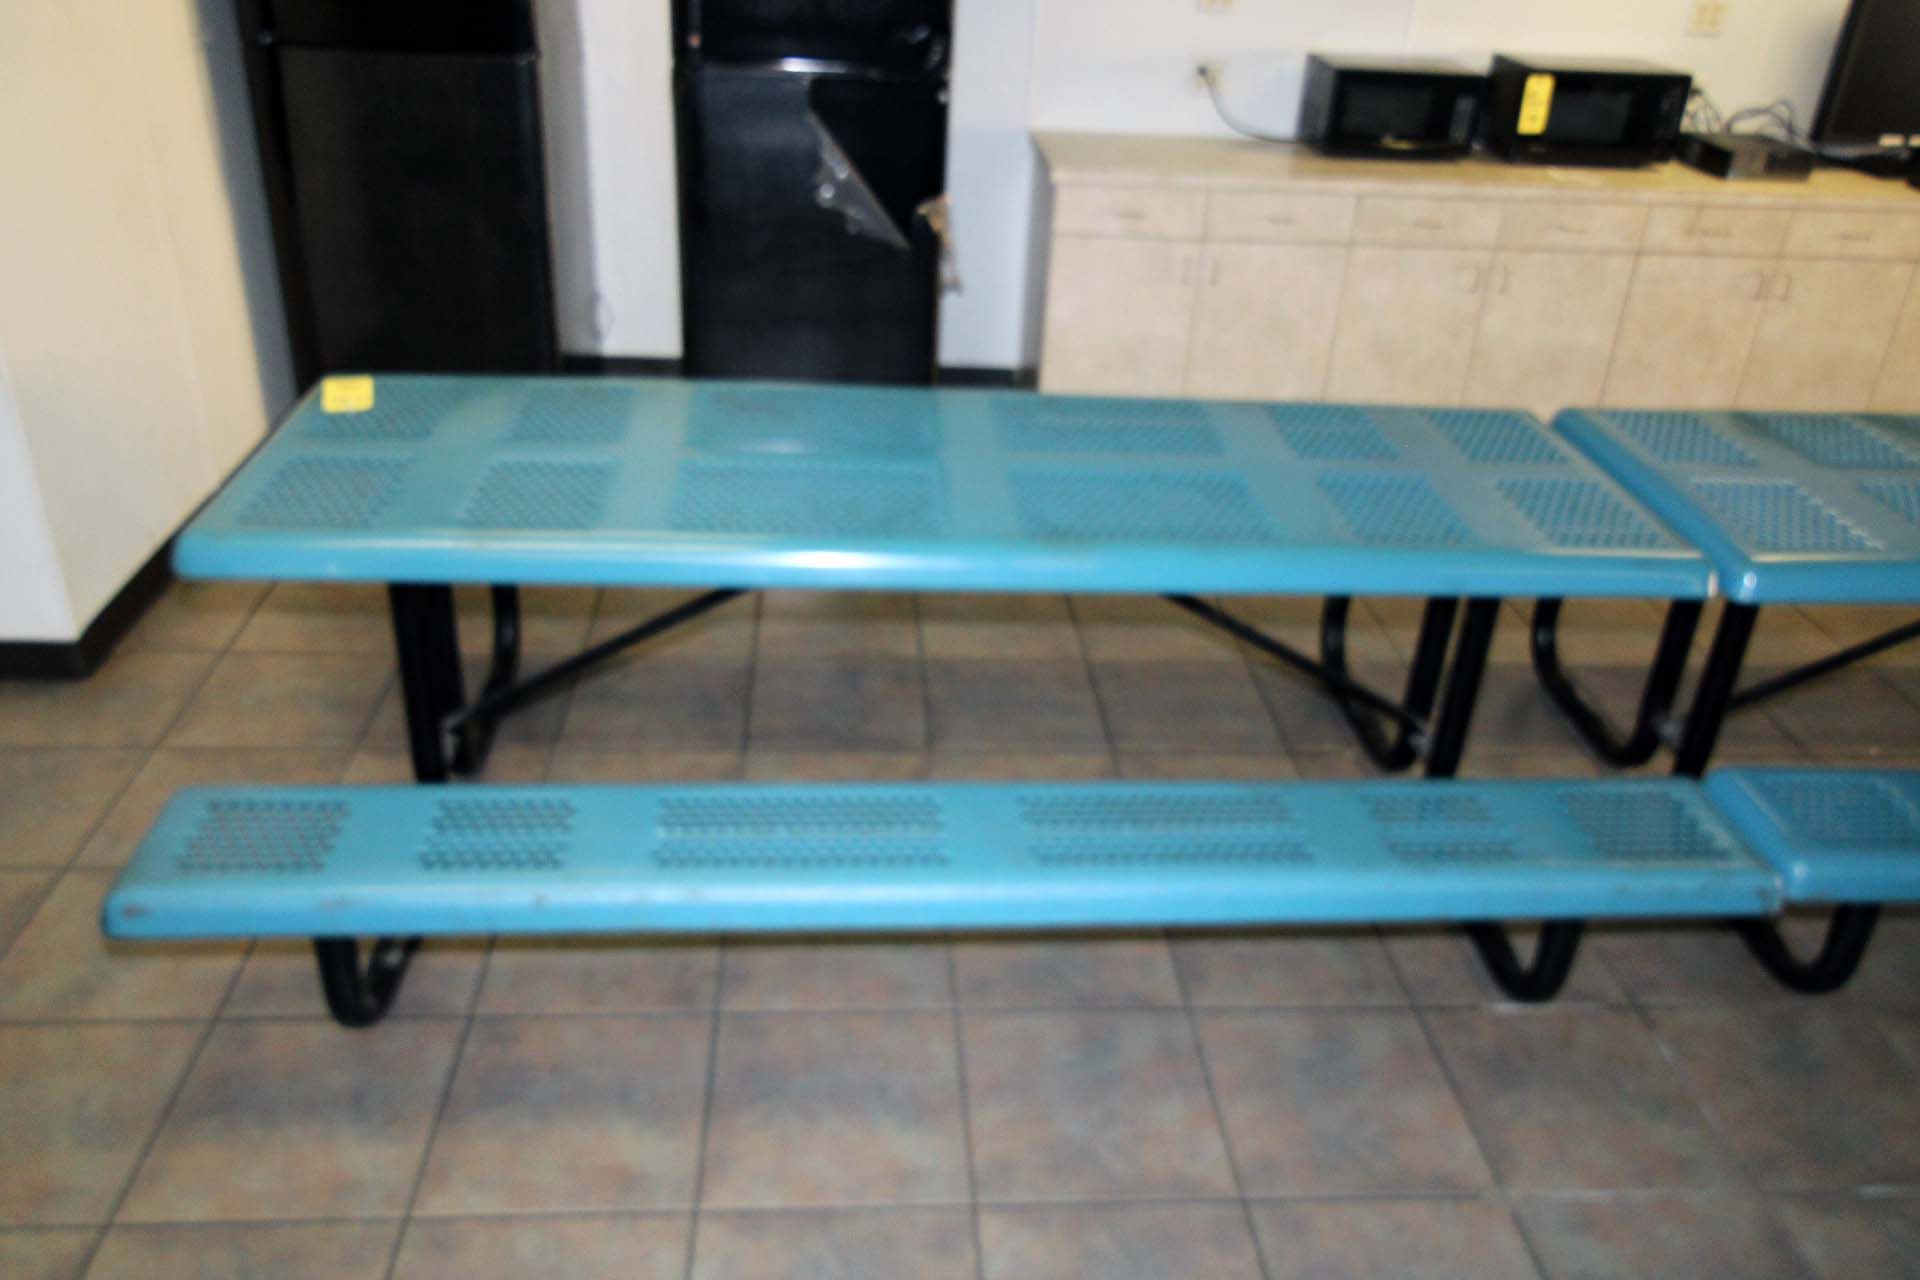 COATED PICNIC TABLE, WEBCOAT, 30" x 96"